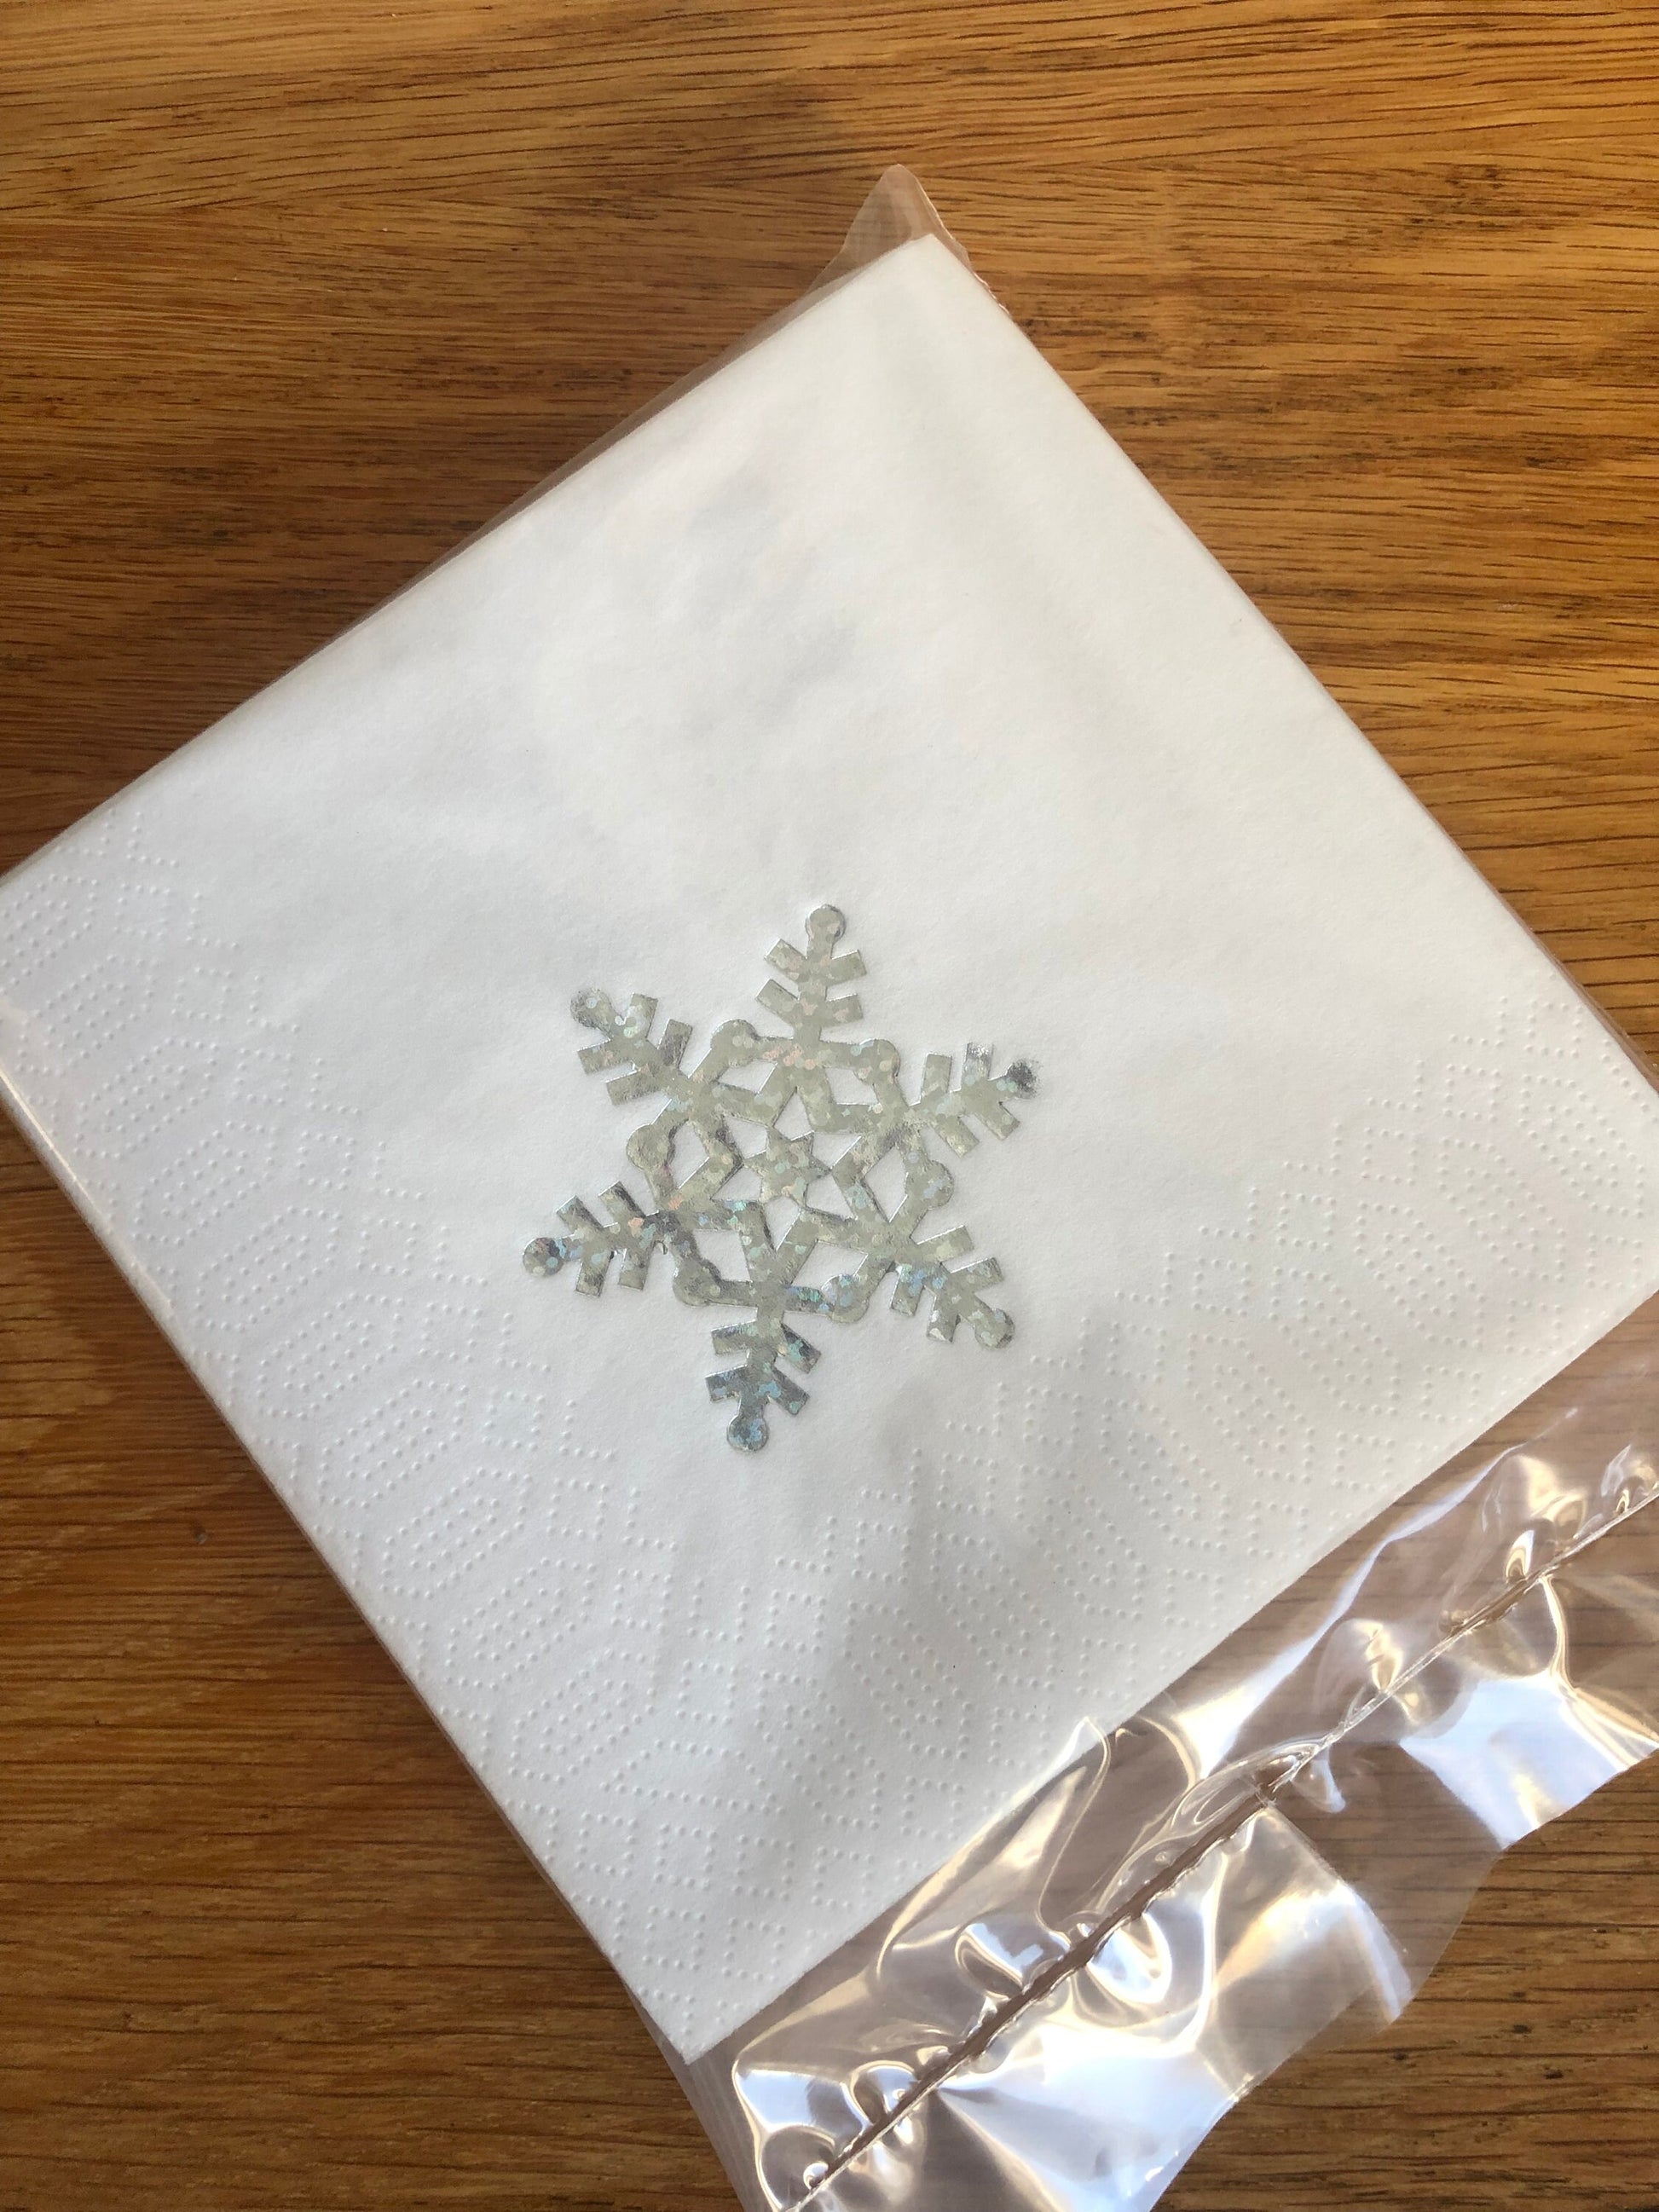 Christmas Sparkling Silver Snowflake Design White Cocktail Napkins / Serviettes pack of 20 drinks party tableware